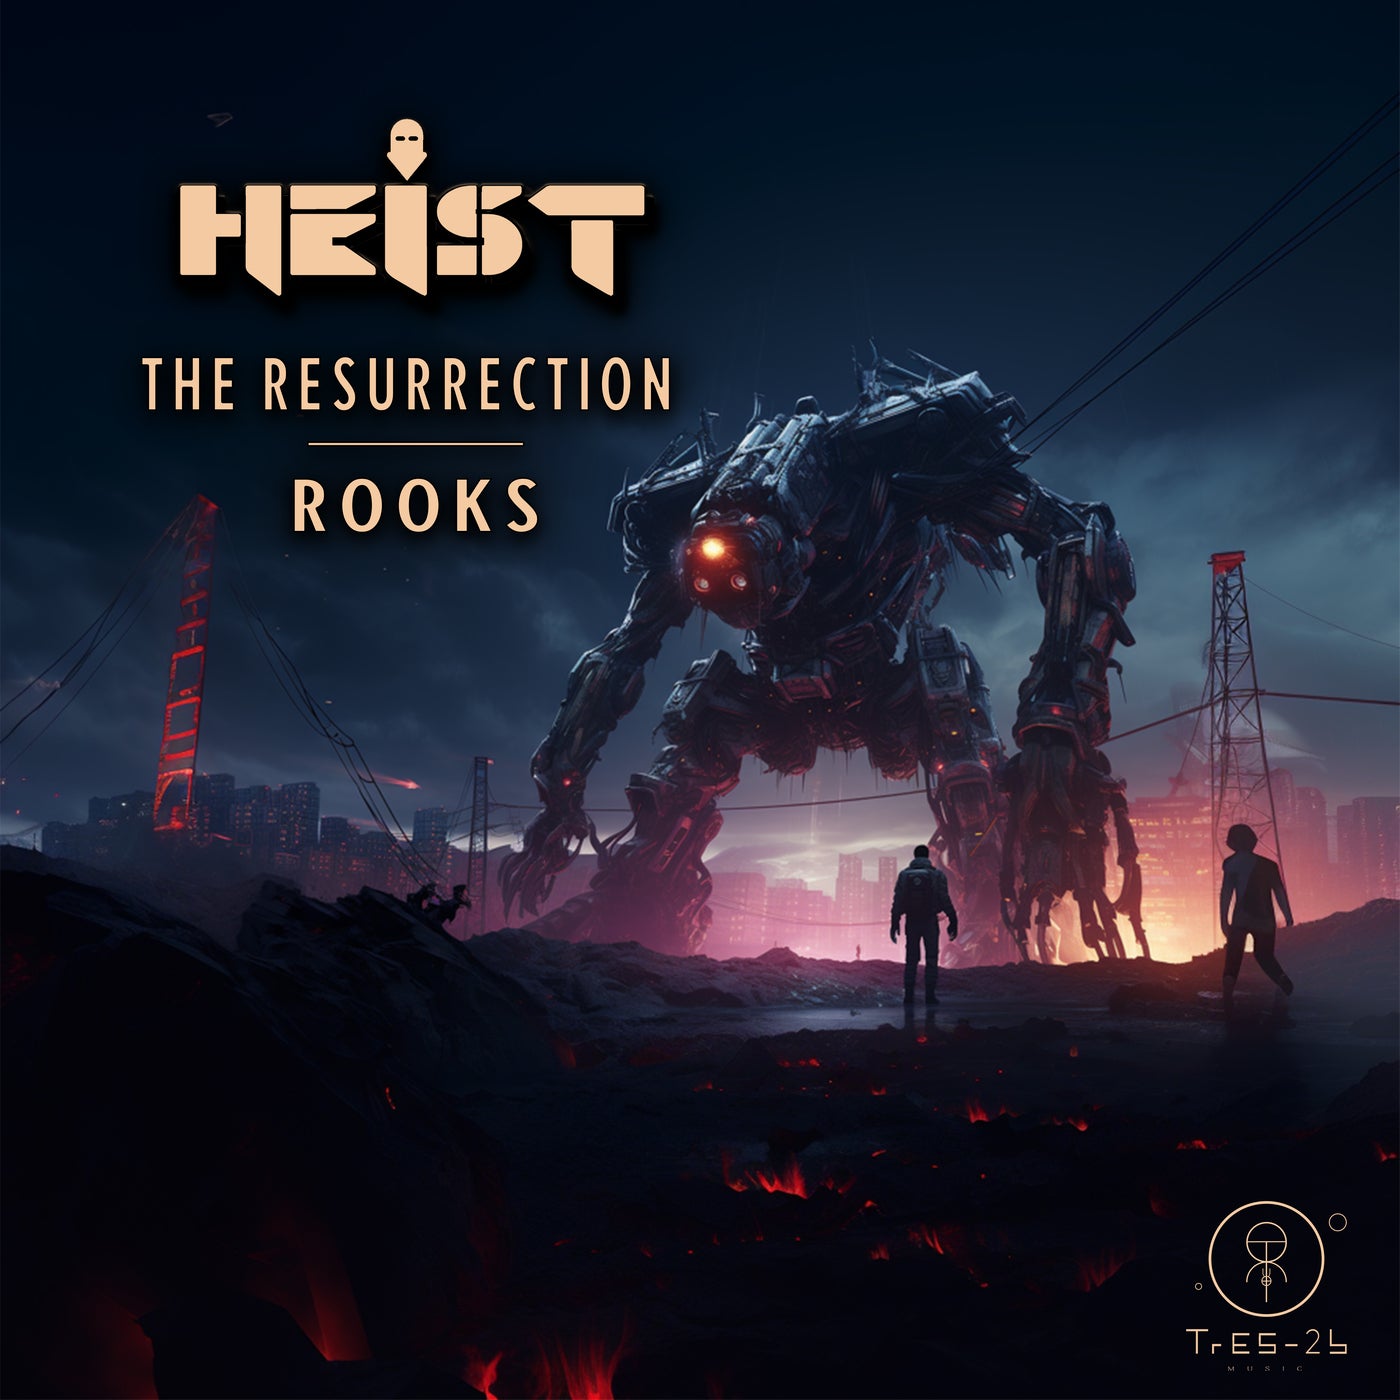 The Ressurection / Rooks